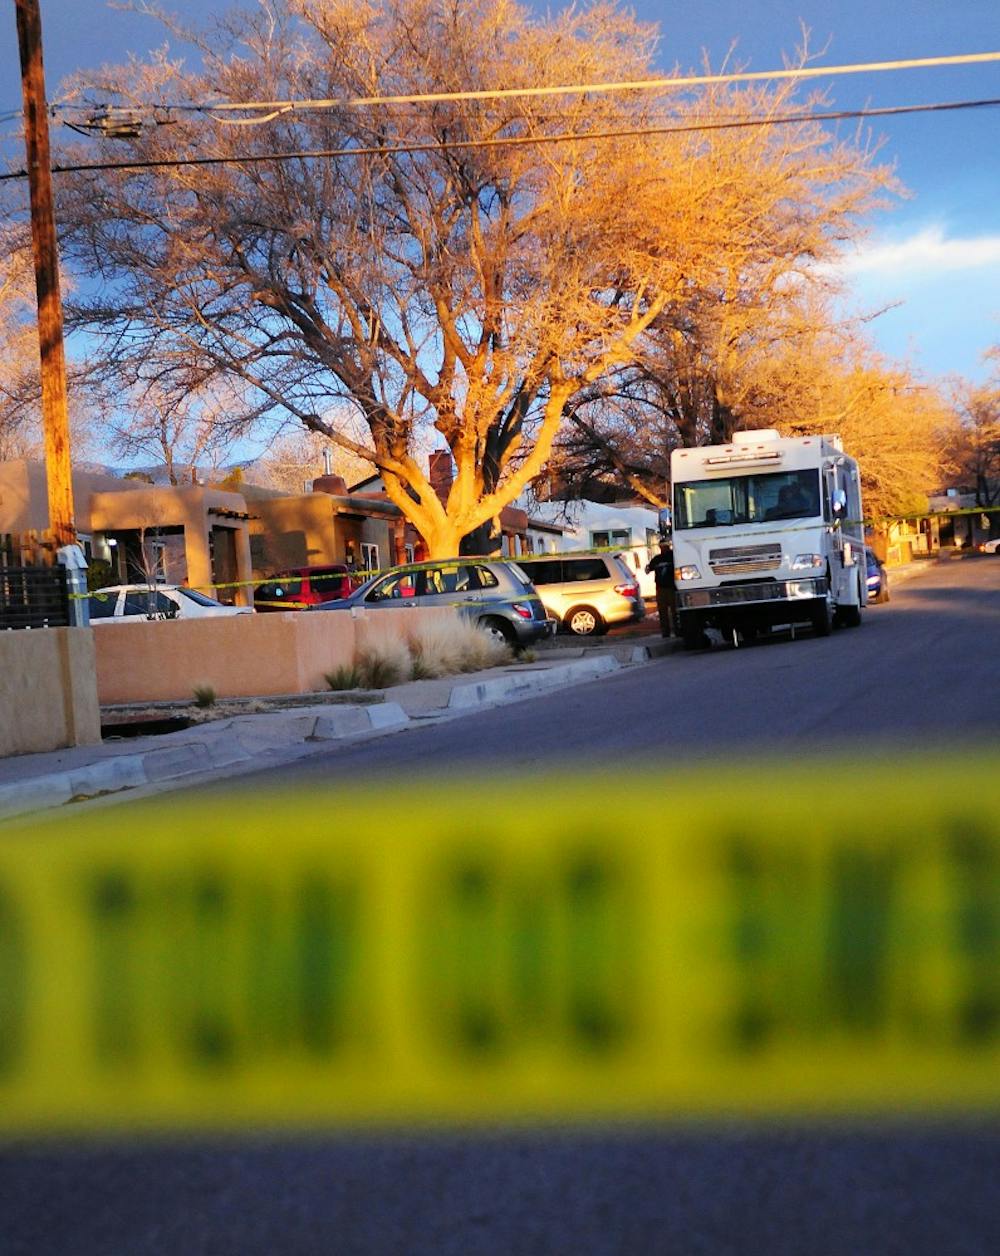 	Police tape surrounds the house near campus where the man identified as the UNM professor and his girlfriend were found. Ralph Montoya, 37, is being held on two counts of murder.